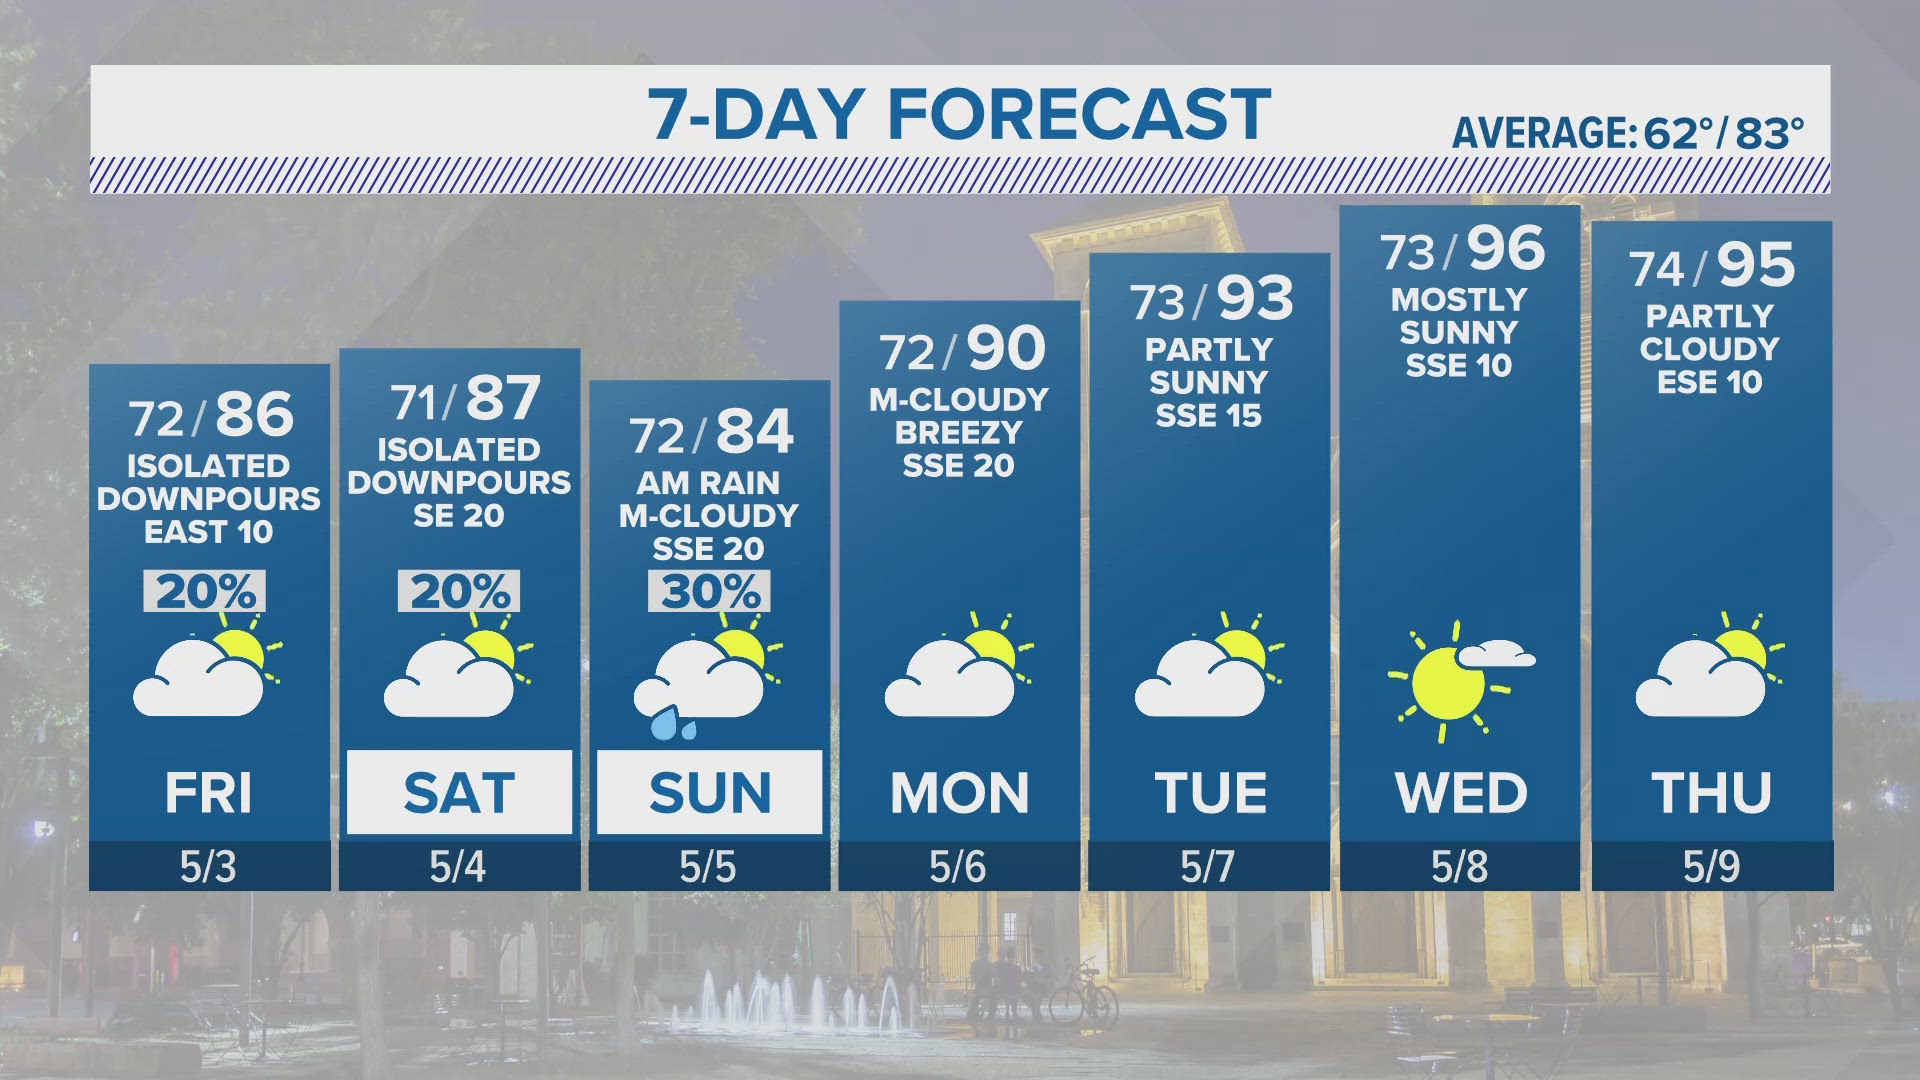 Humidity will remain high, so isolated showers will stay in the forecast through the weekend.